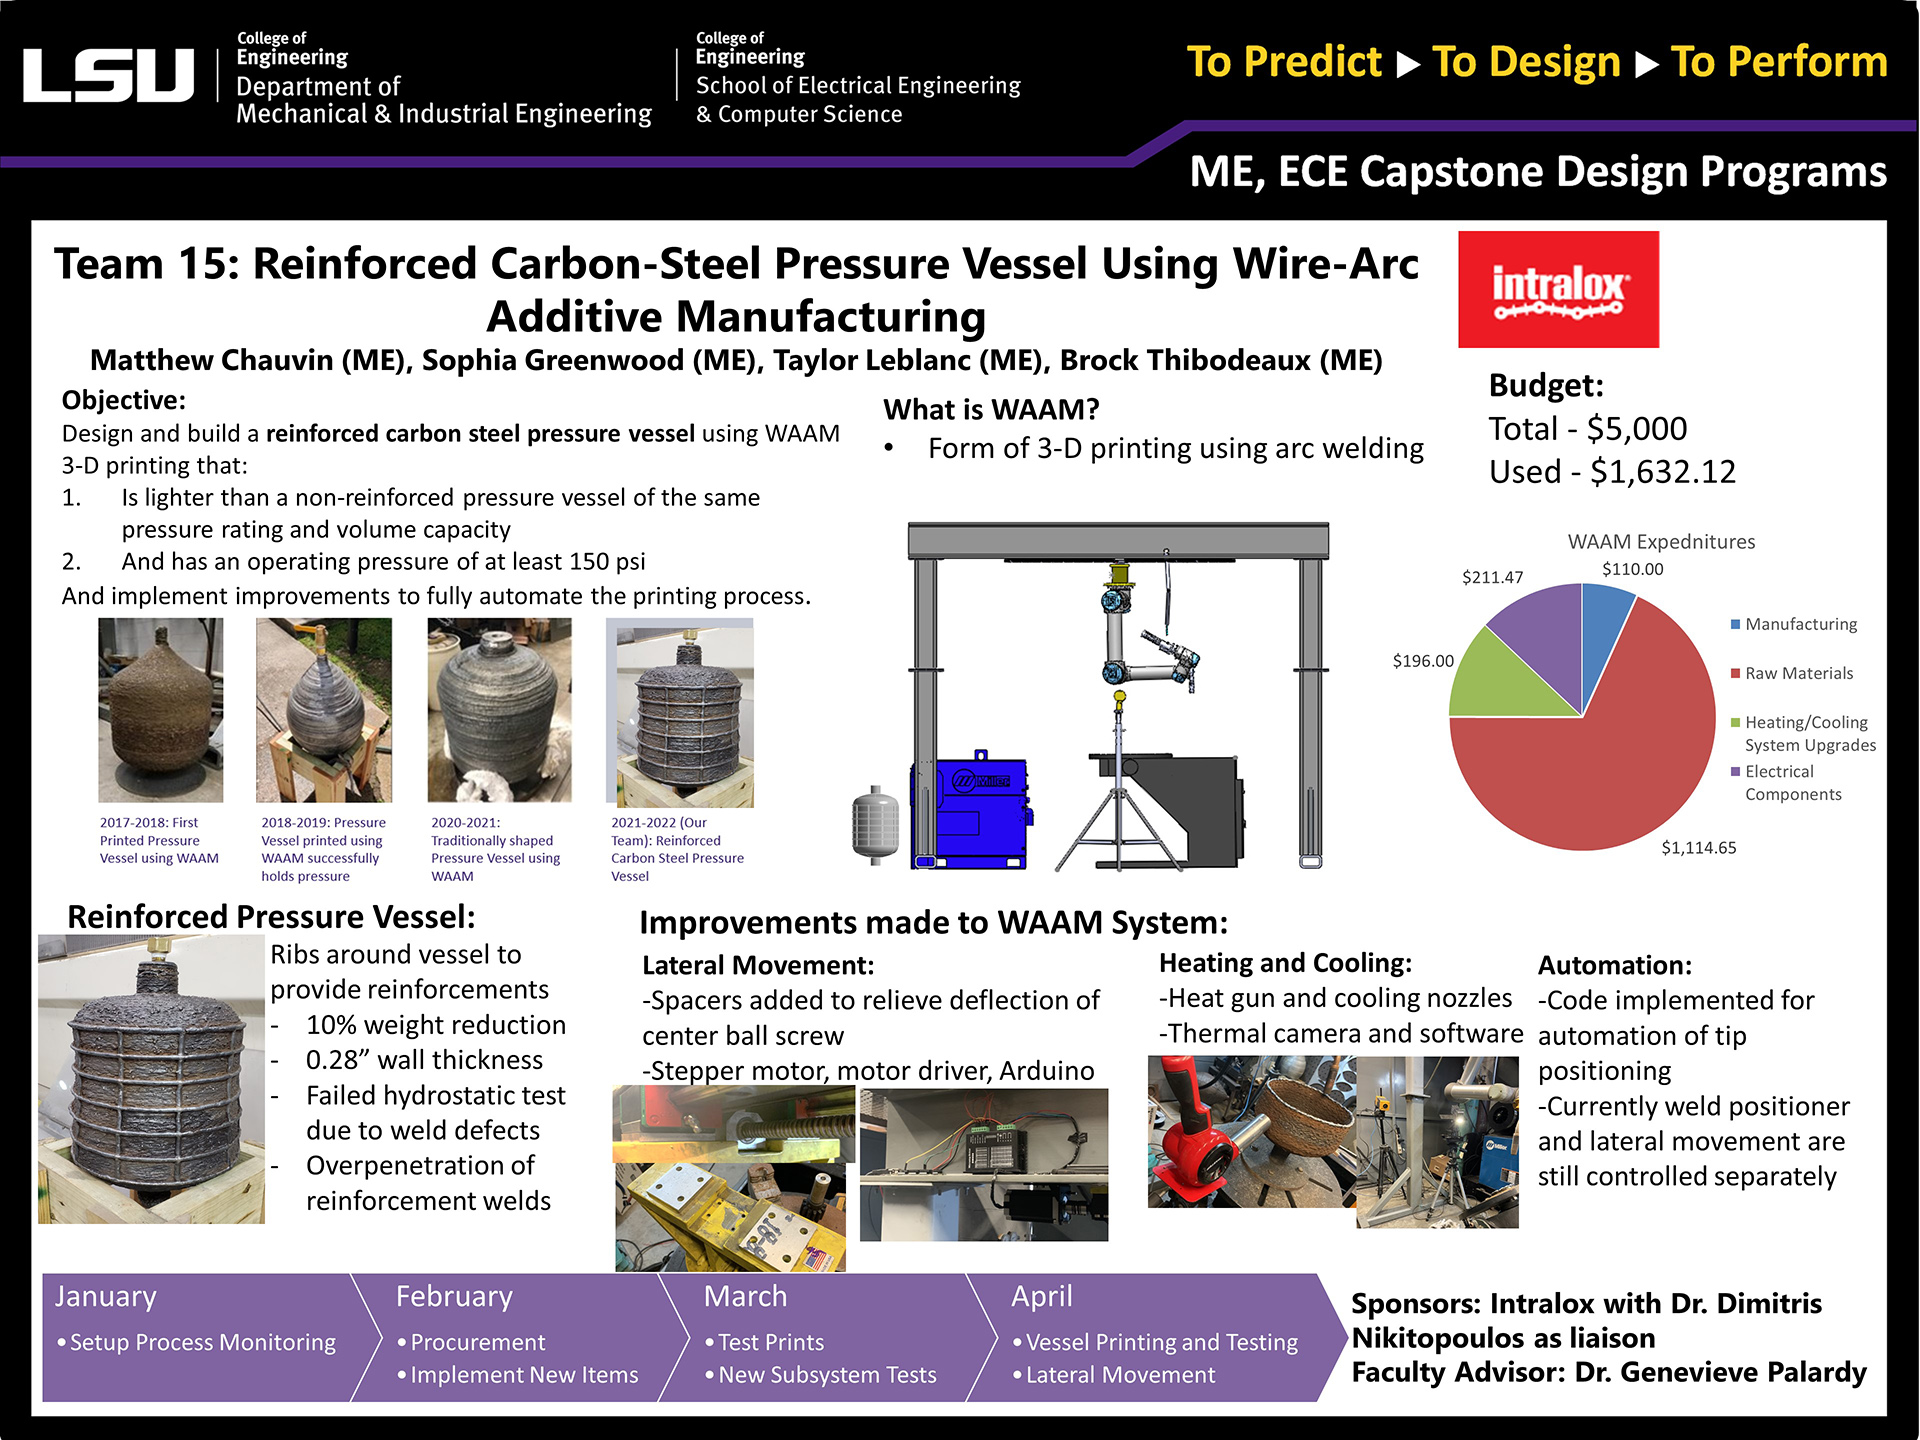 Project 15: 3D-Printed Reinforced Pressure Vessel Design and Build with Wire-Arc Additive Manufacturing (WAAM) (2022)